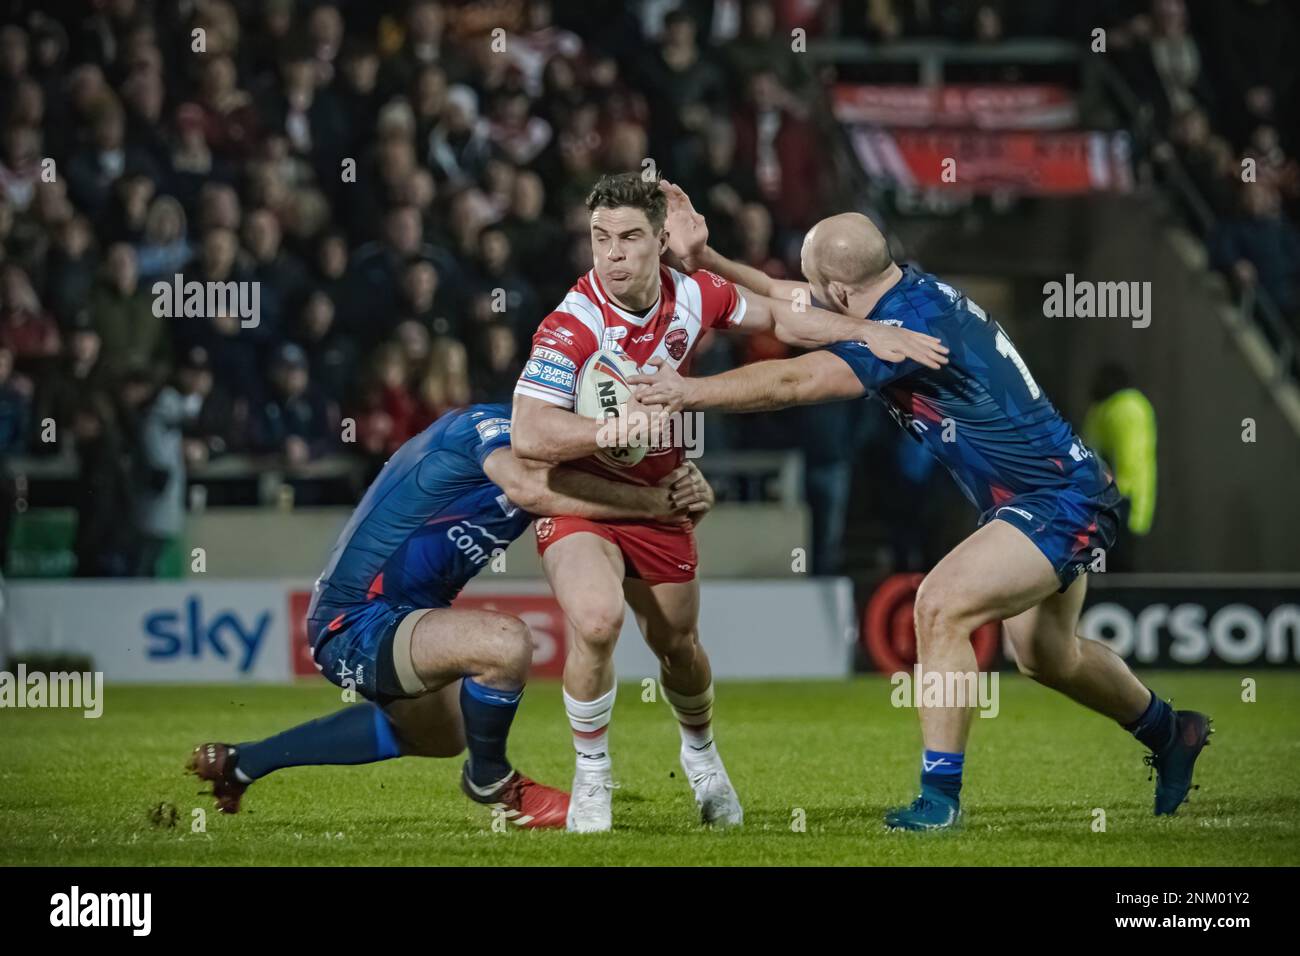 Salford Red Devils v Hull KR, AJ Bell Stadium, Salford, England. 23rd February 2023. Betfred Super League; Credit Mark Percy/Alamy Stock Photo. Stock Photo